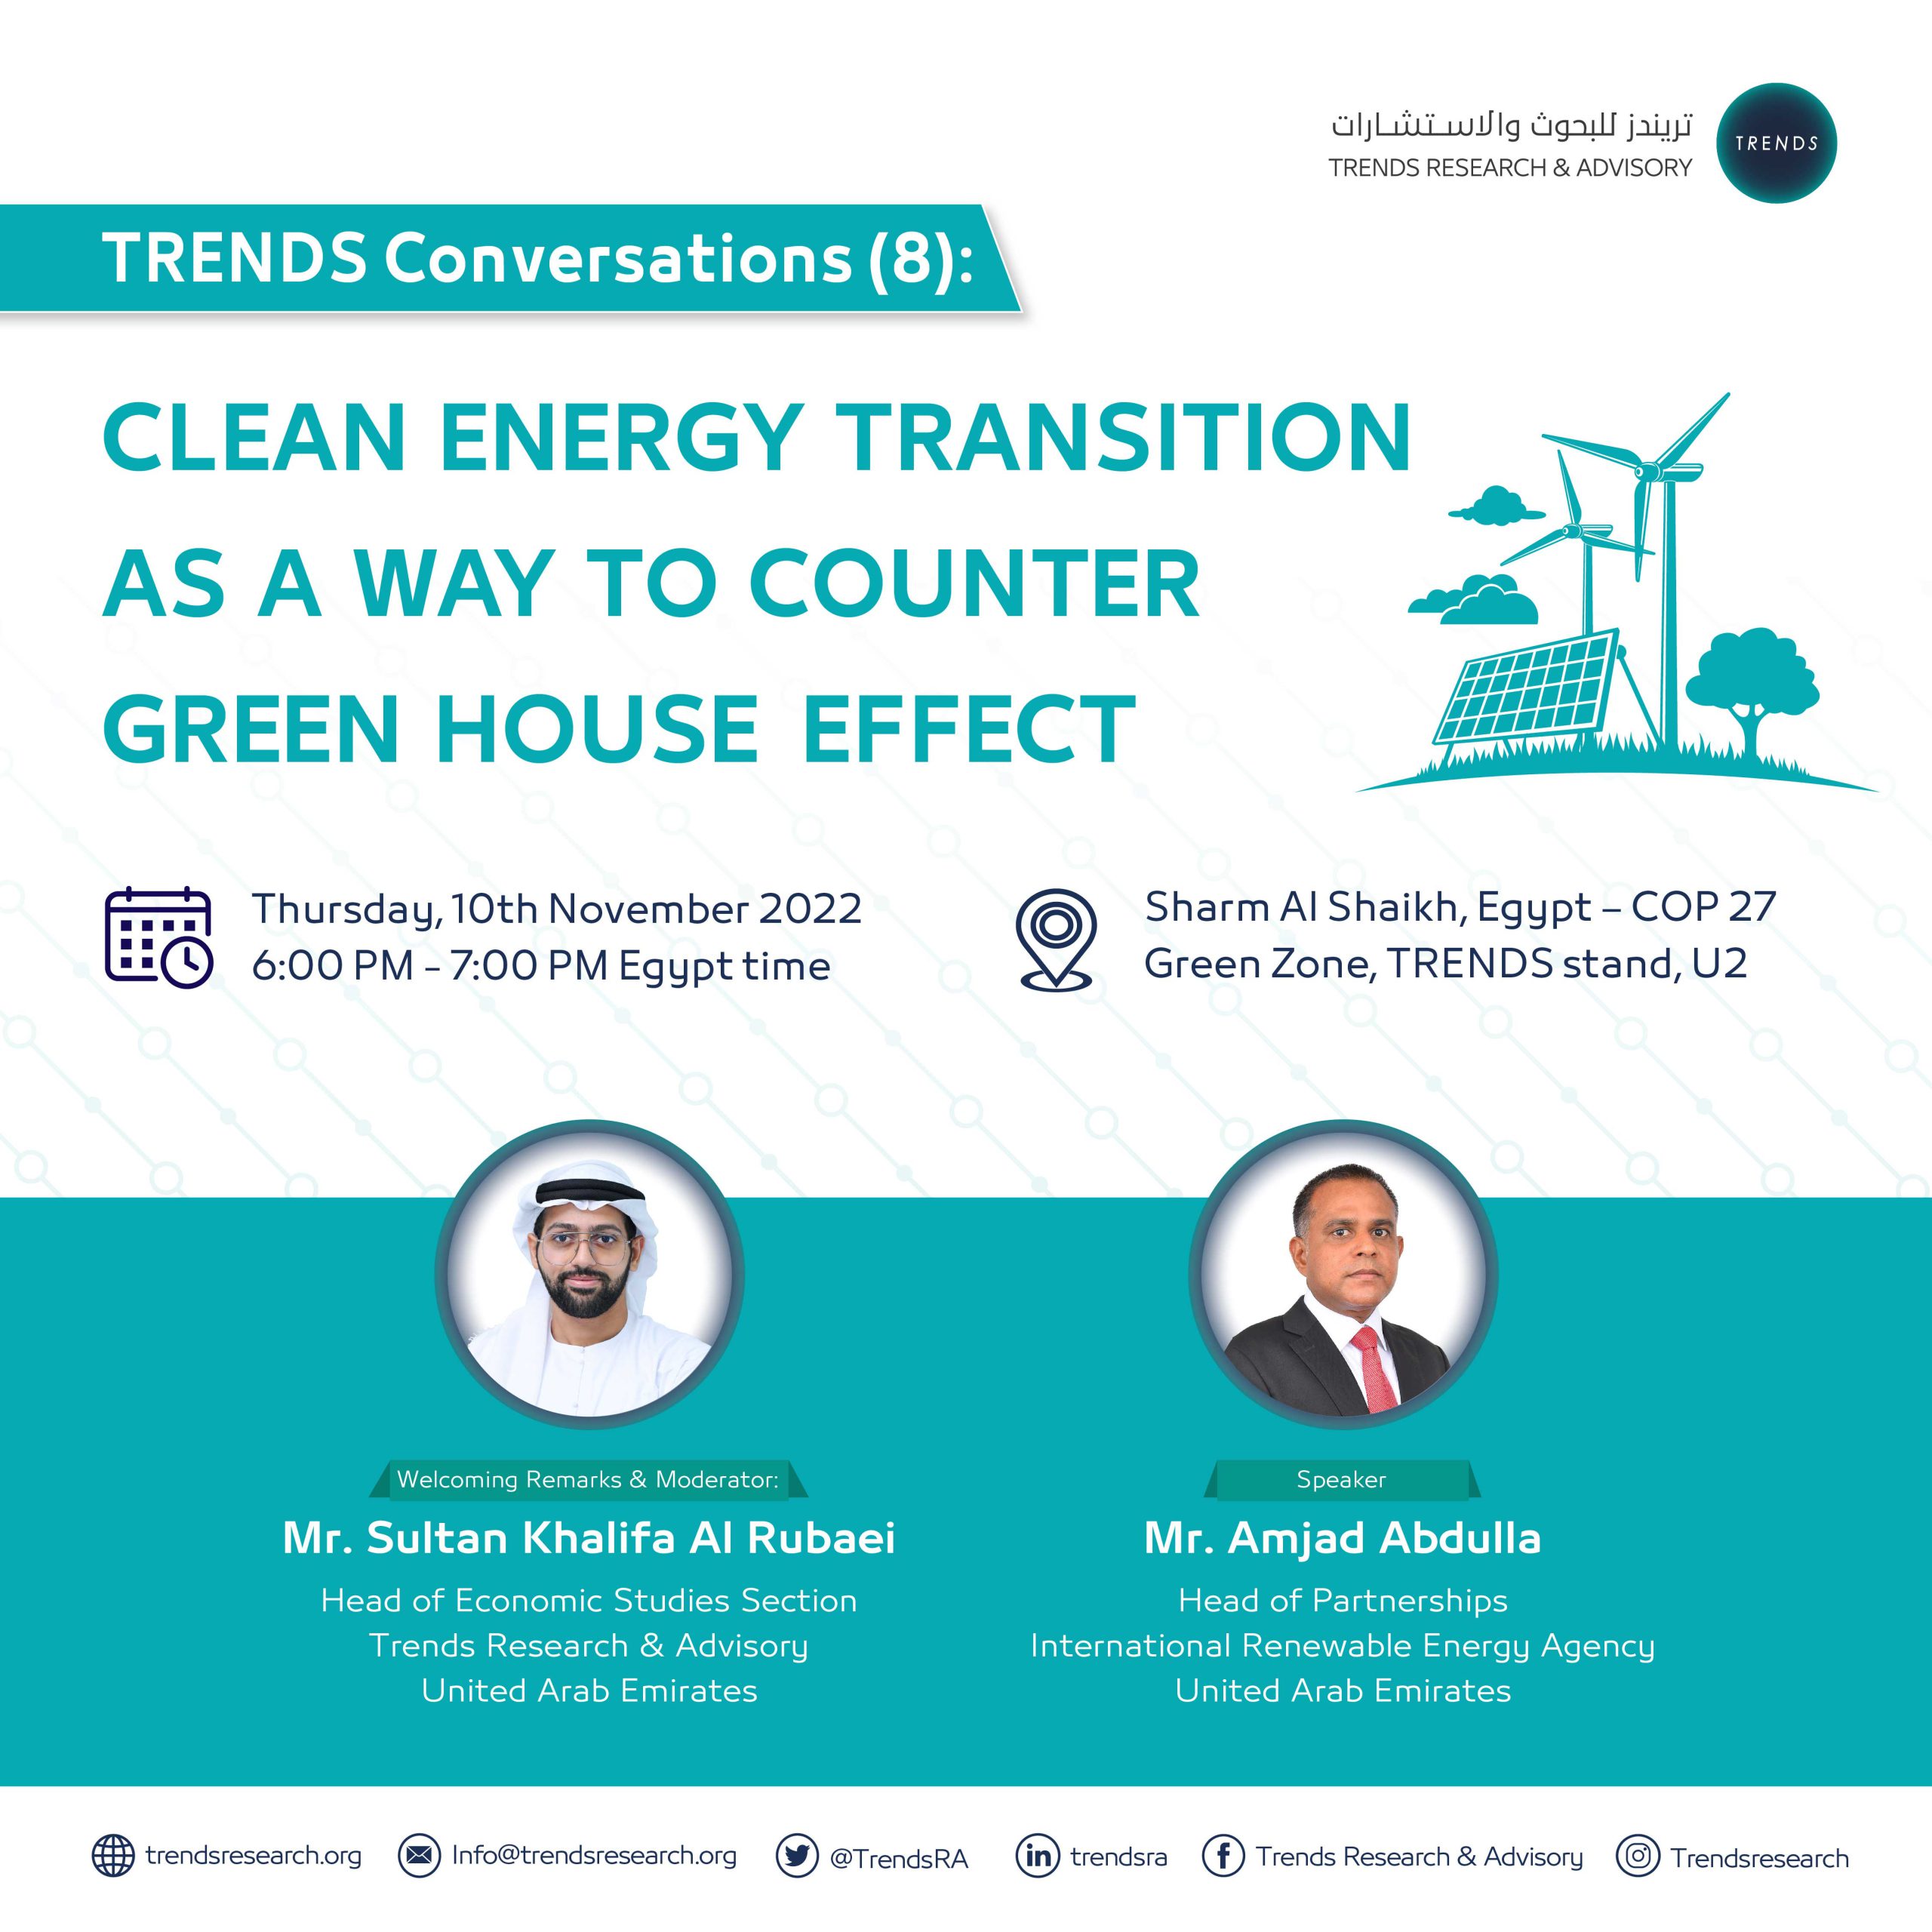 Clean energy transition as a way to counter greenhouse effect